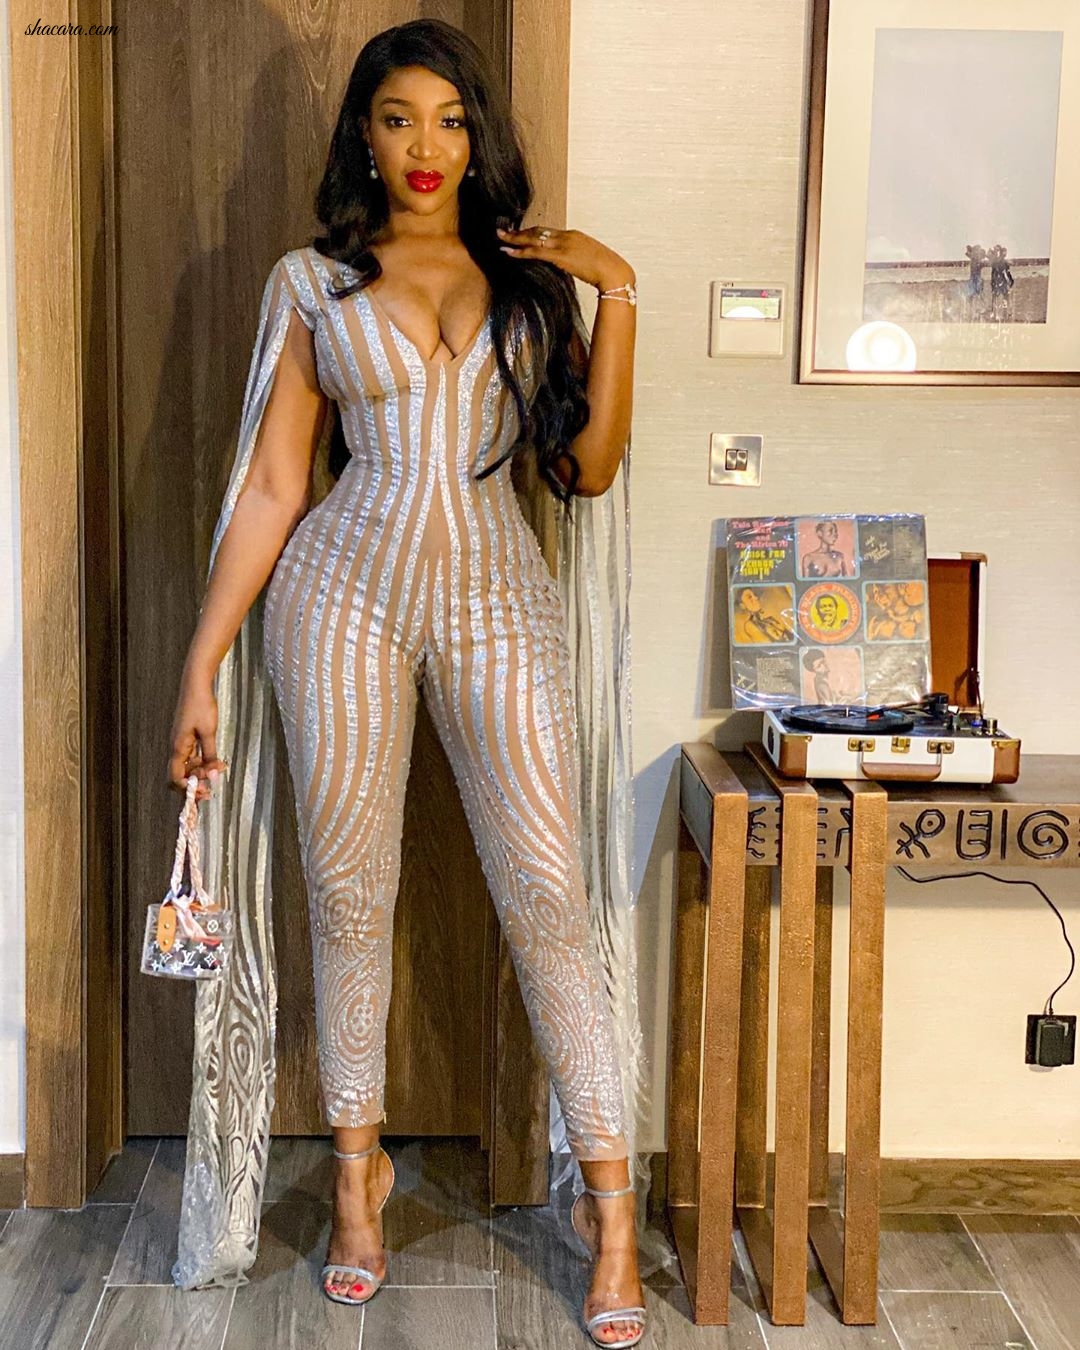 Outfit Change! Nollywood Stars Dazzle At The 2020 AMVCA After-Party